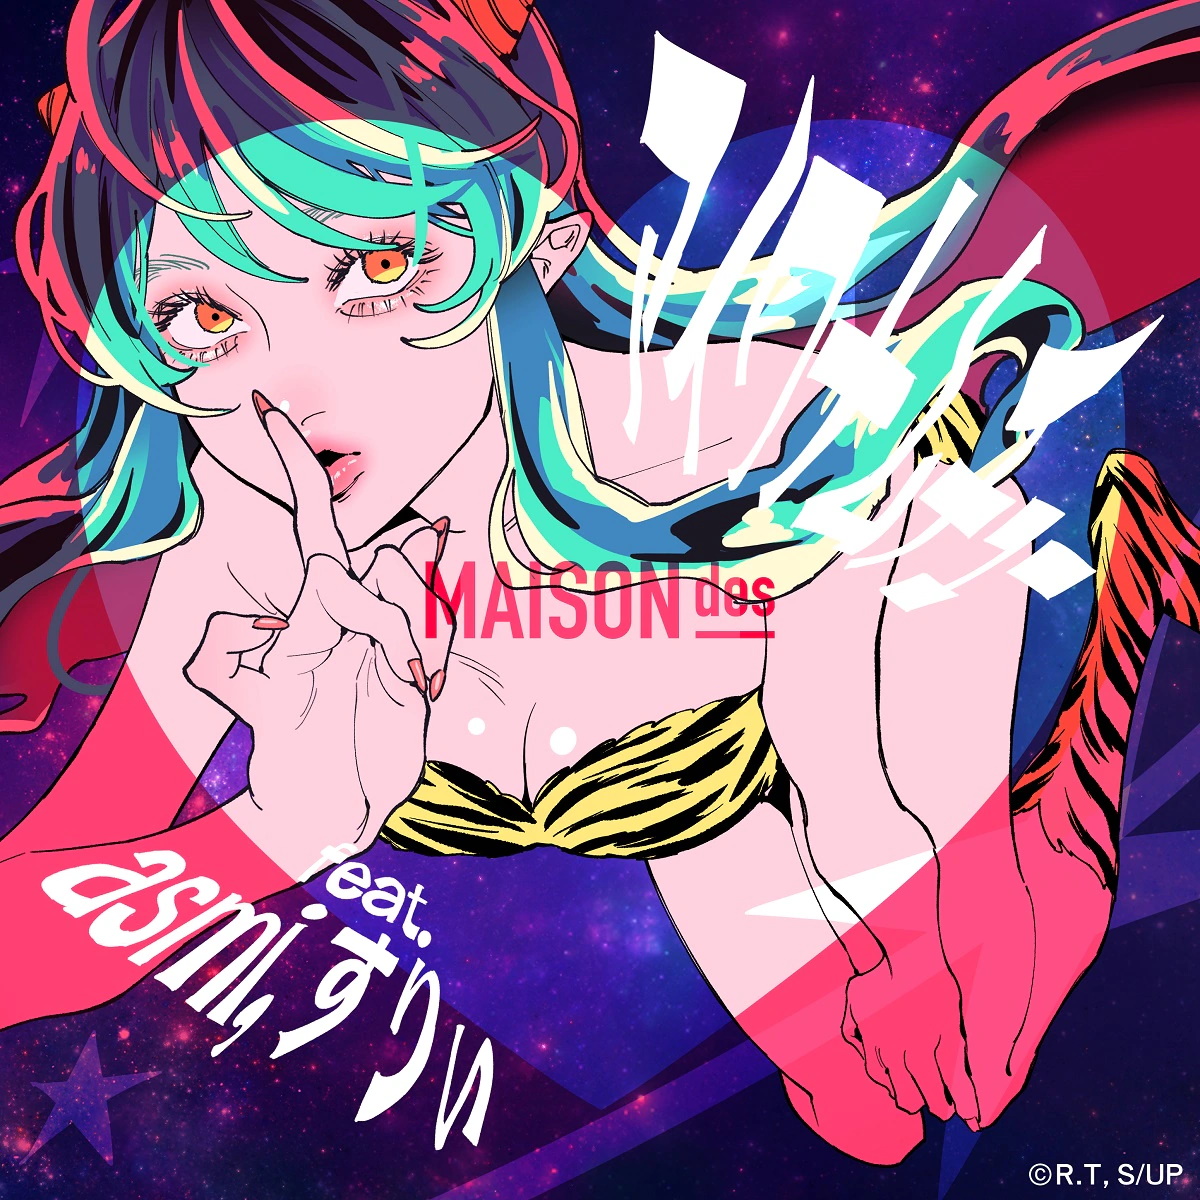 Cover art for『MAISONdes - アイワナムチュー feat. asmi, すりぃ』from the release『Love Trap Muchu (feat. asmi & Three)